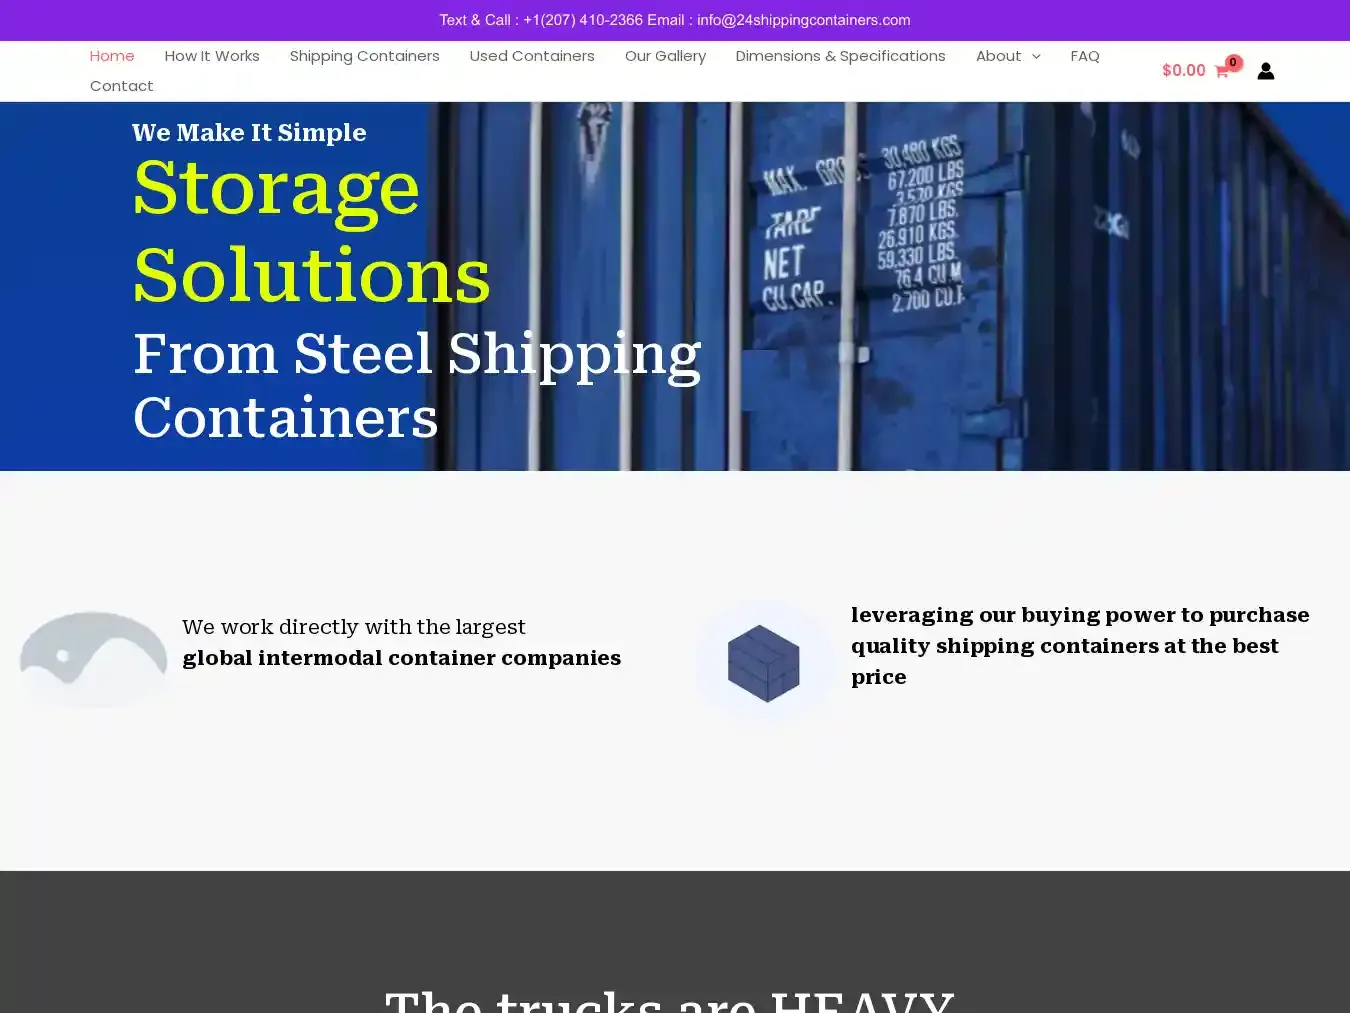 24shippingcontainers.com Fraudulent Container website.